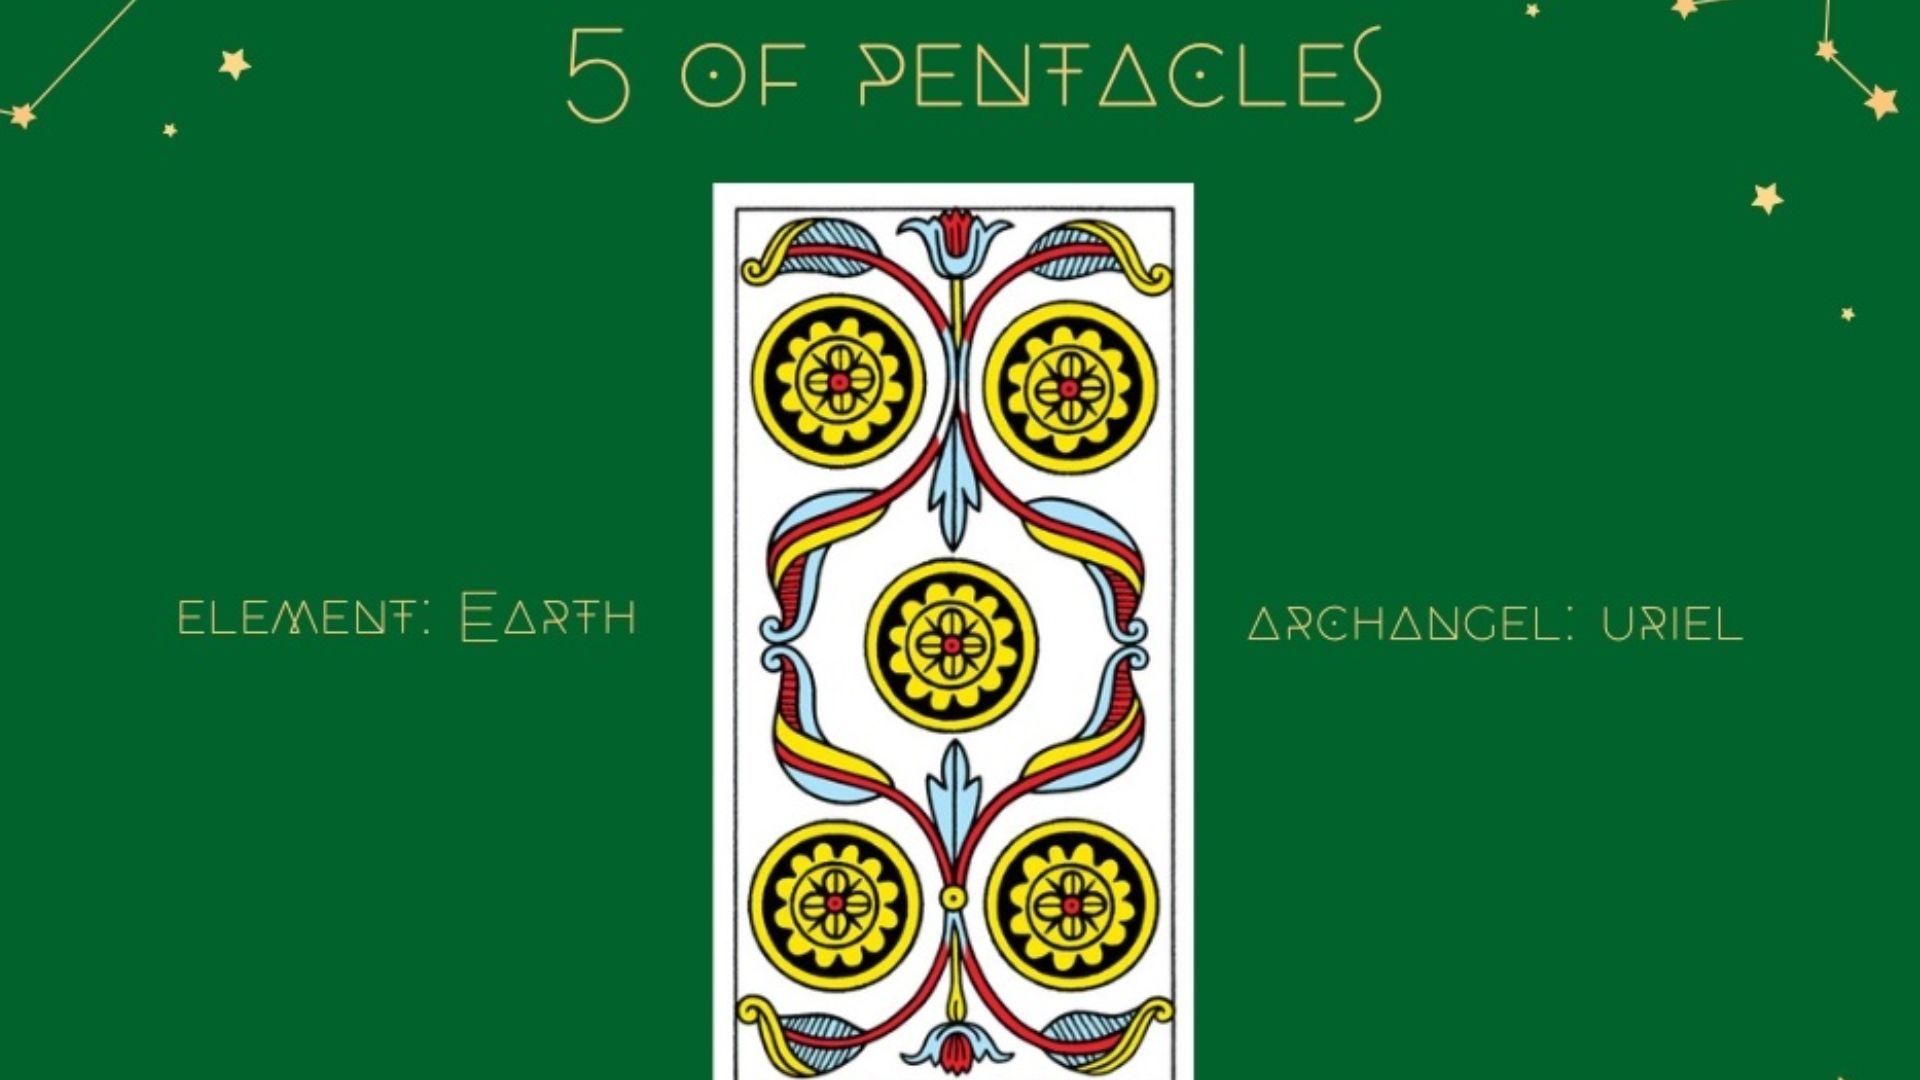 5 Of Pentacles Tarot Card In Green Background